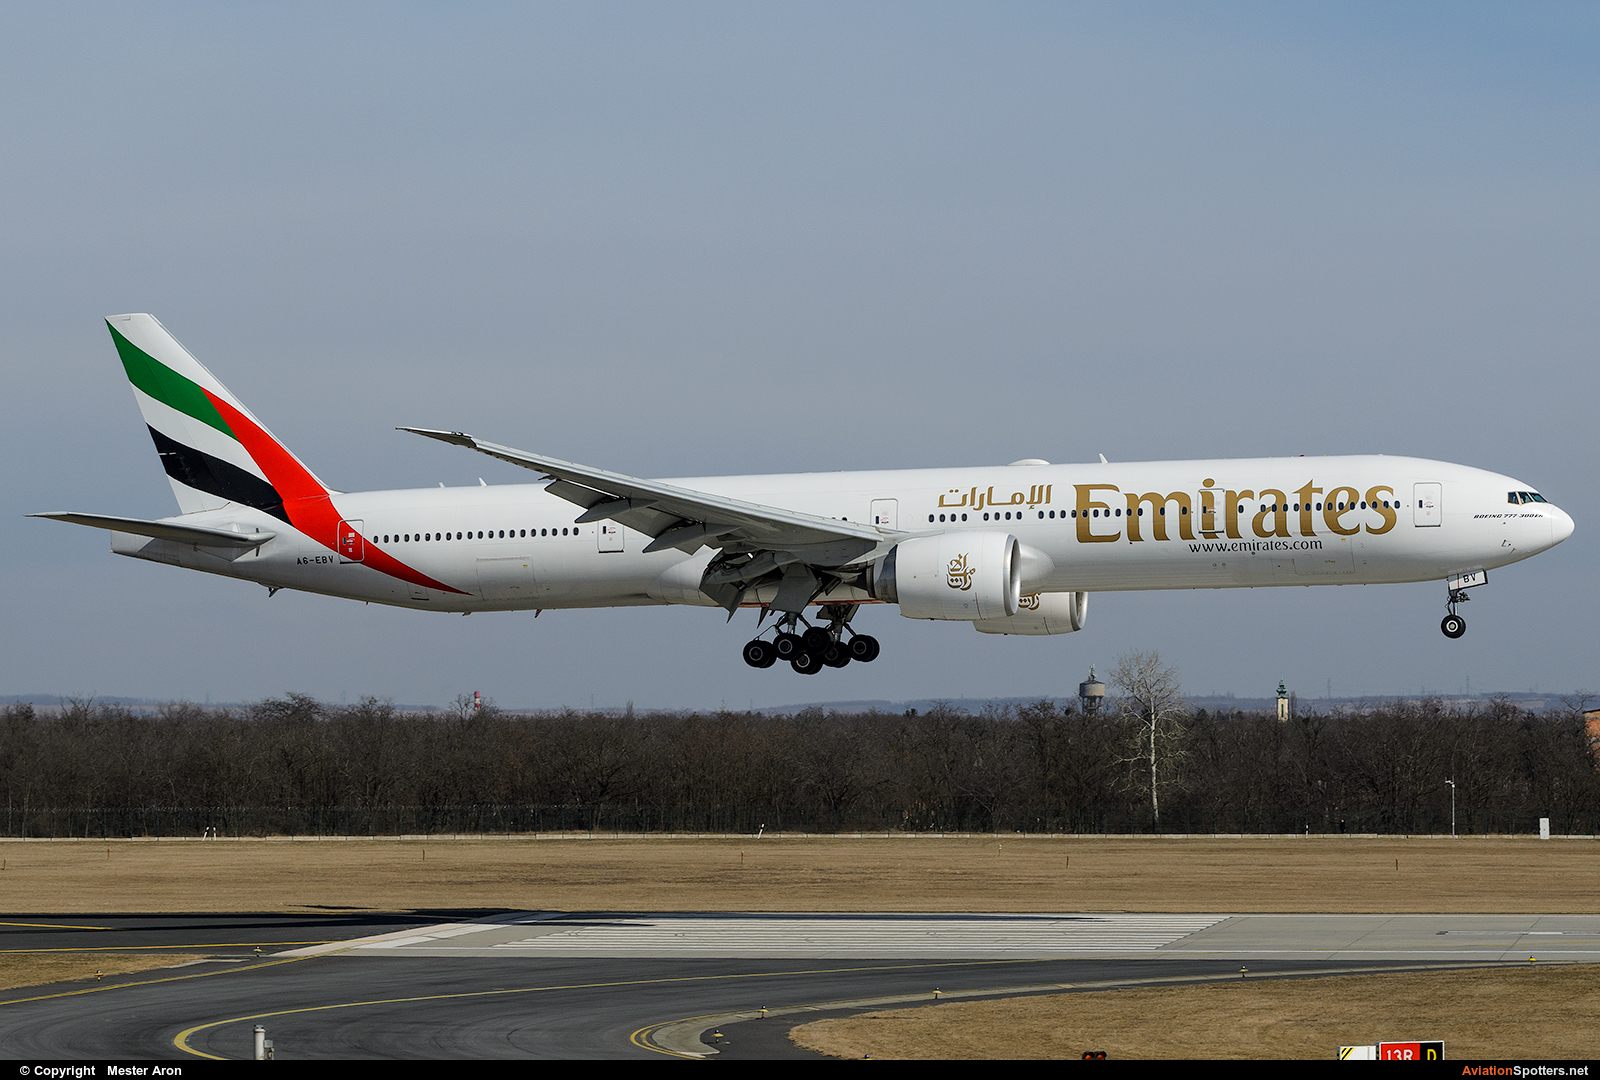 Emirates Airlines  -  777-300ER  (A6-EBV) By Mester Aron (MesterAron)